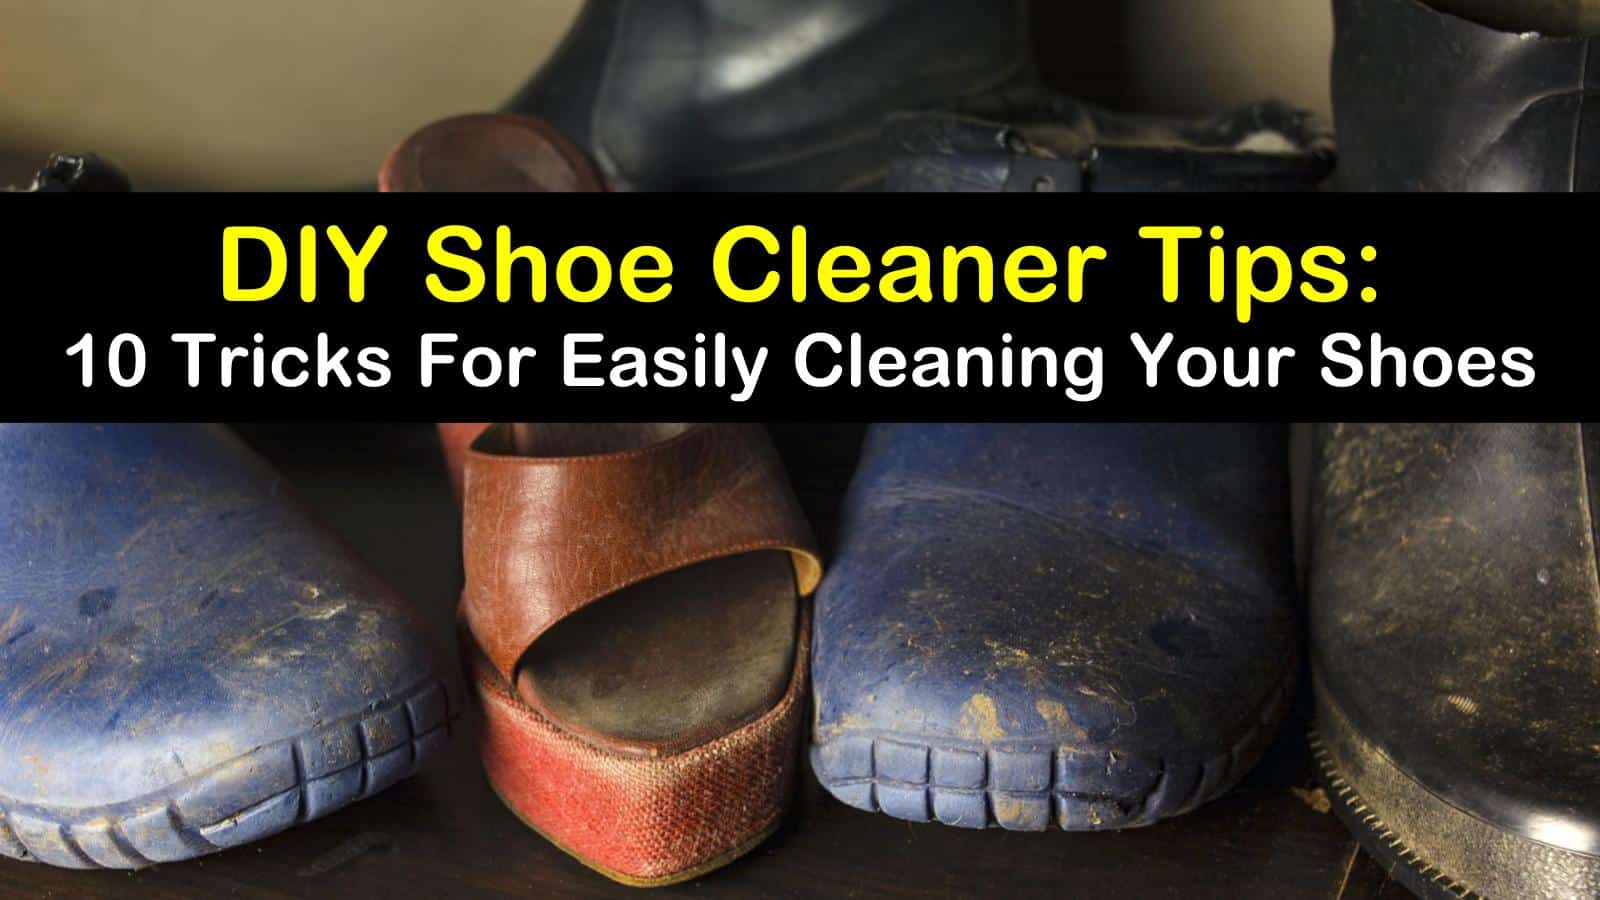 How To Clean Suede Shoes In 6 Easy Steps